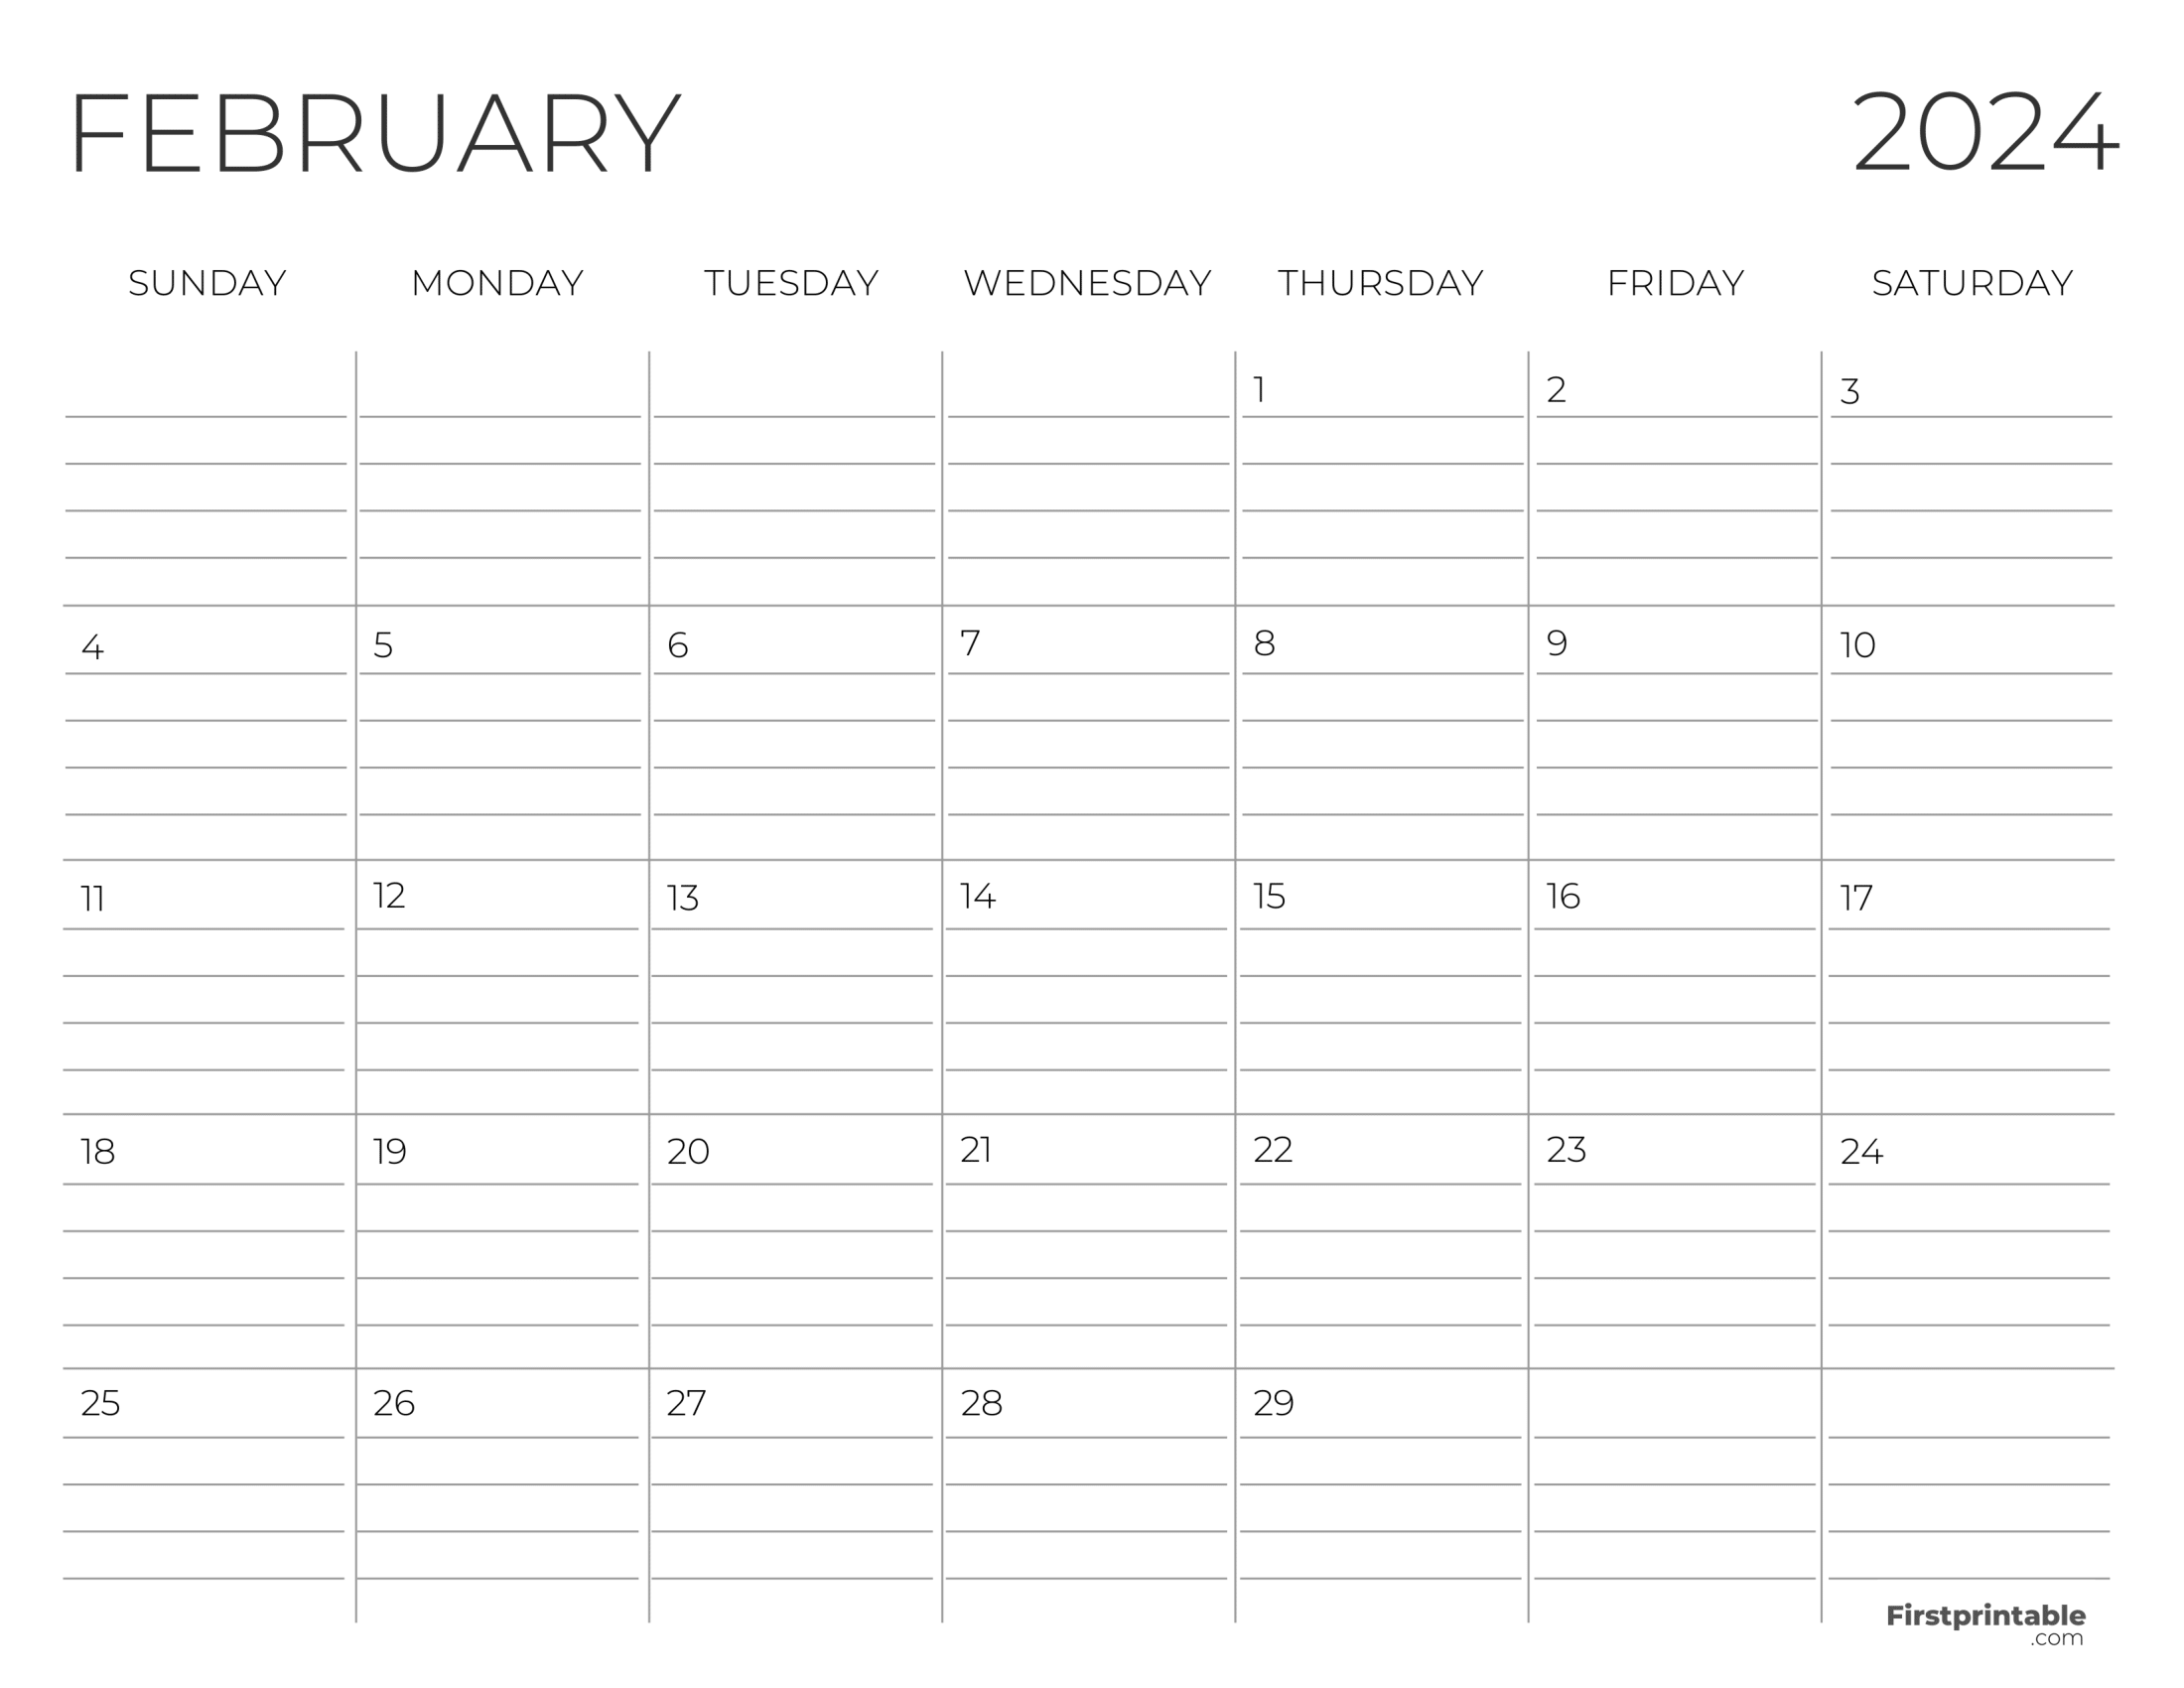 February Calendar 2024 with lines - Printable and Fillable